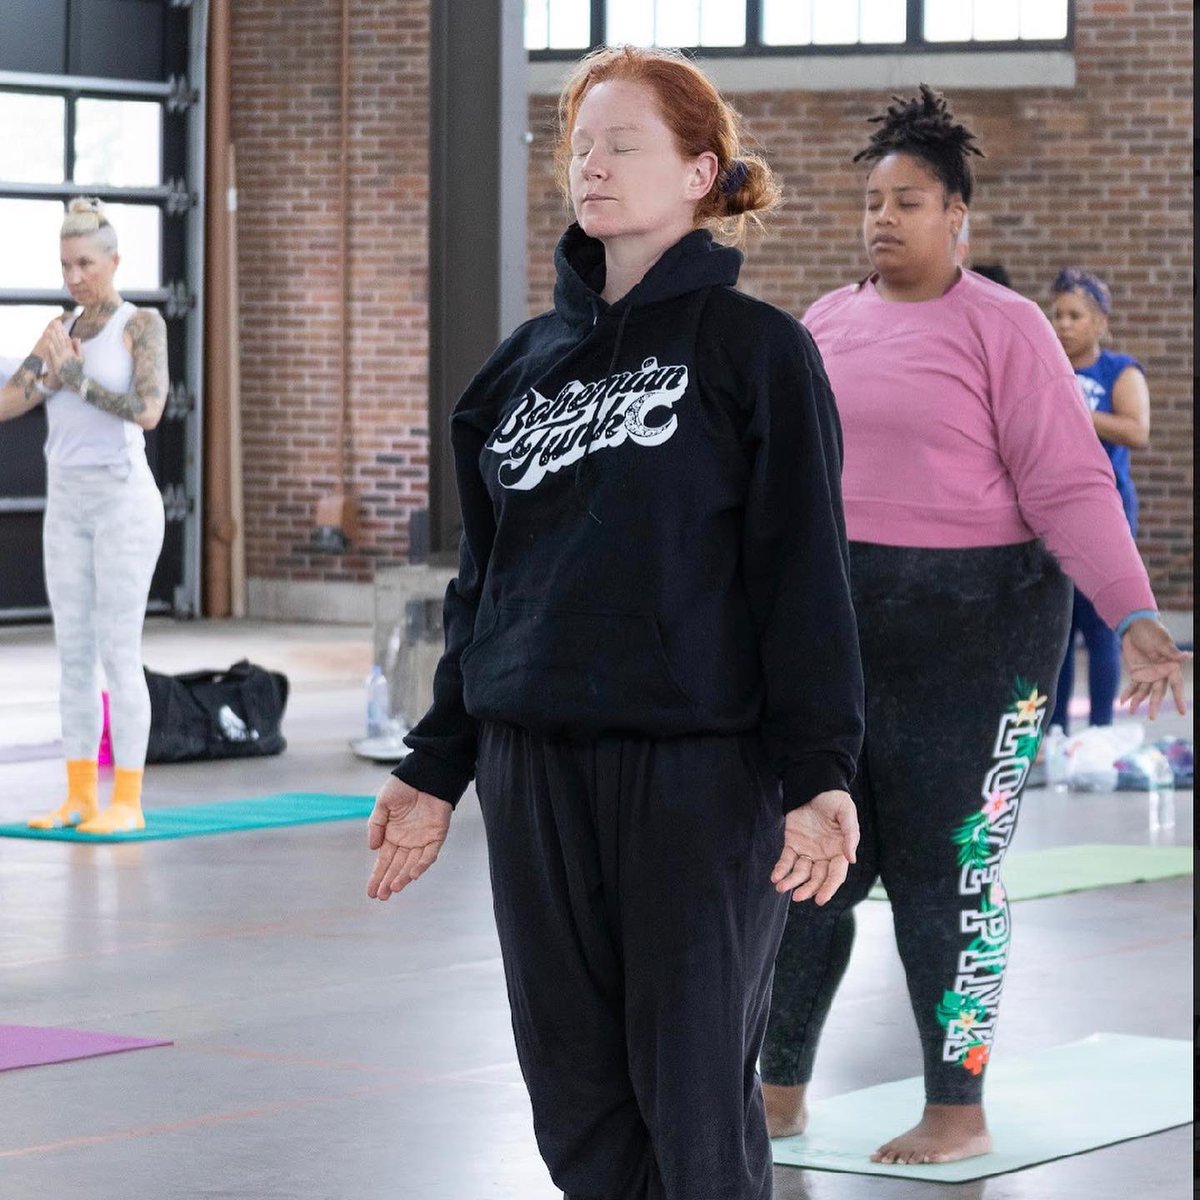 Our free #communityyoga classes are accessible and inclusive. Join Charlotte for an all-levels class every Tuesday at @easternmarket 

#DetroitYogis 
#YoganicFlow 
#DetroitYogaCommunity